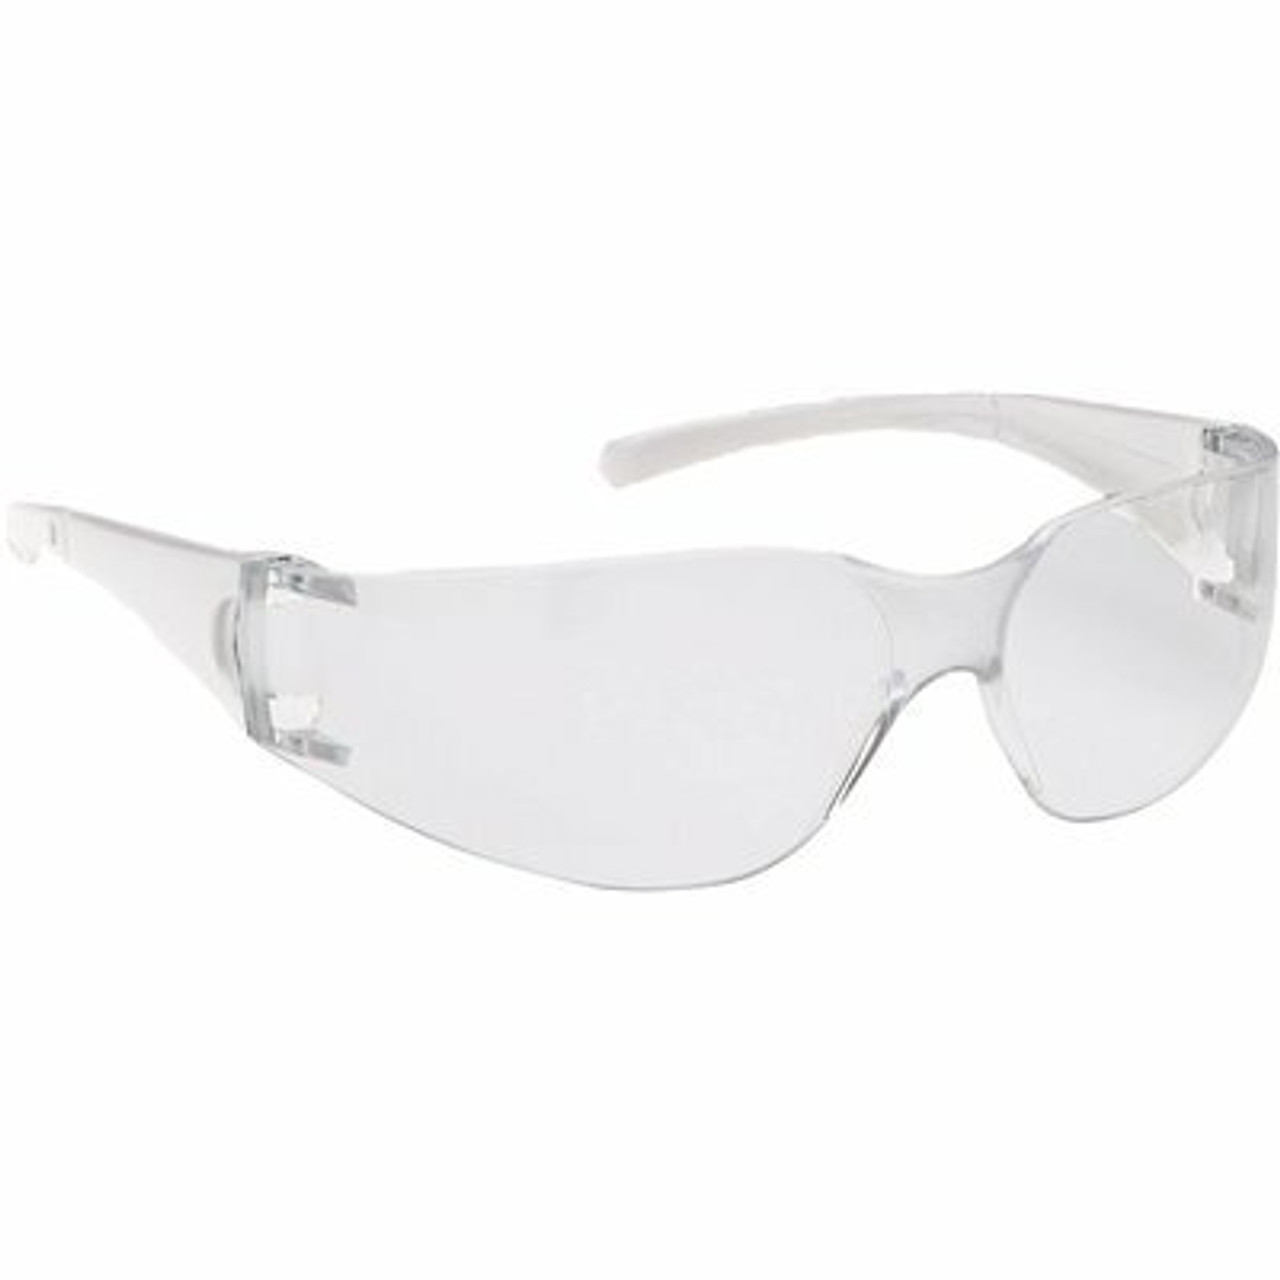 Kleenguard Element Safety Glasses, Lightweight, Economical, Disposable, Metal-Free, Clear Lens And Frame, 12 Pairs / Case